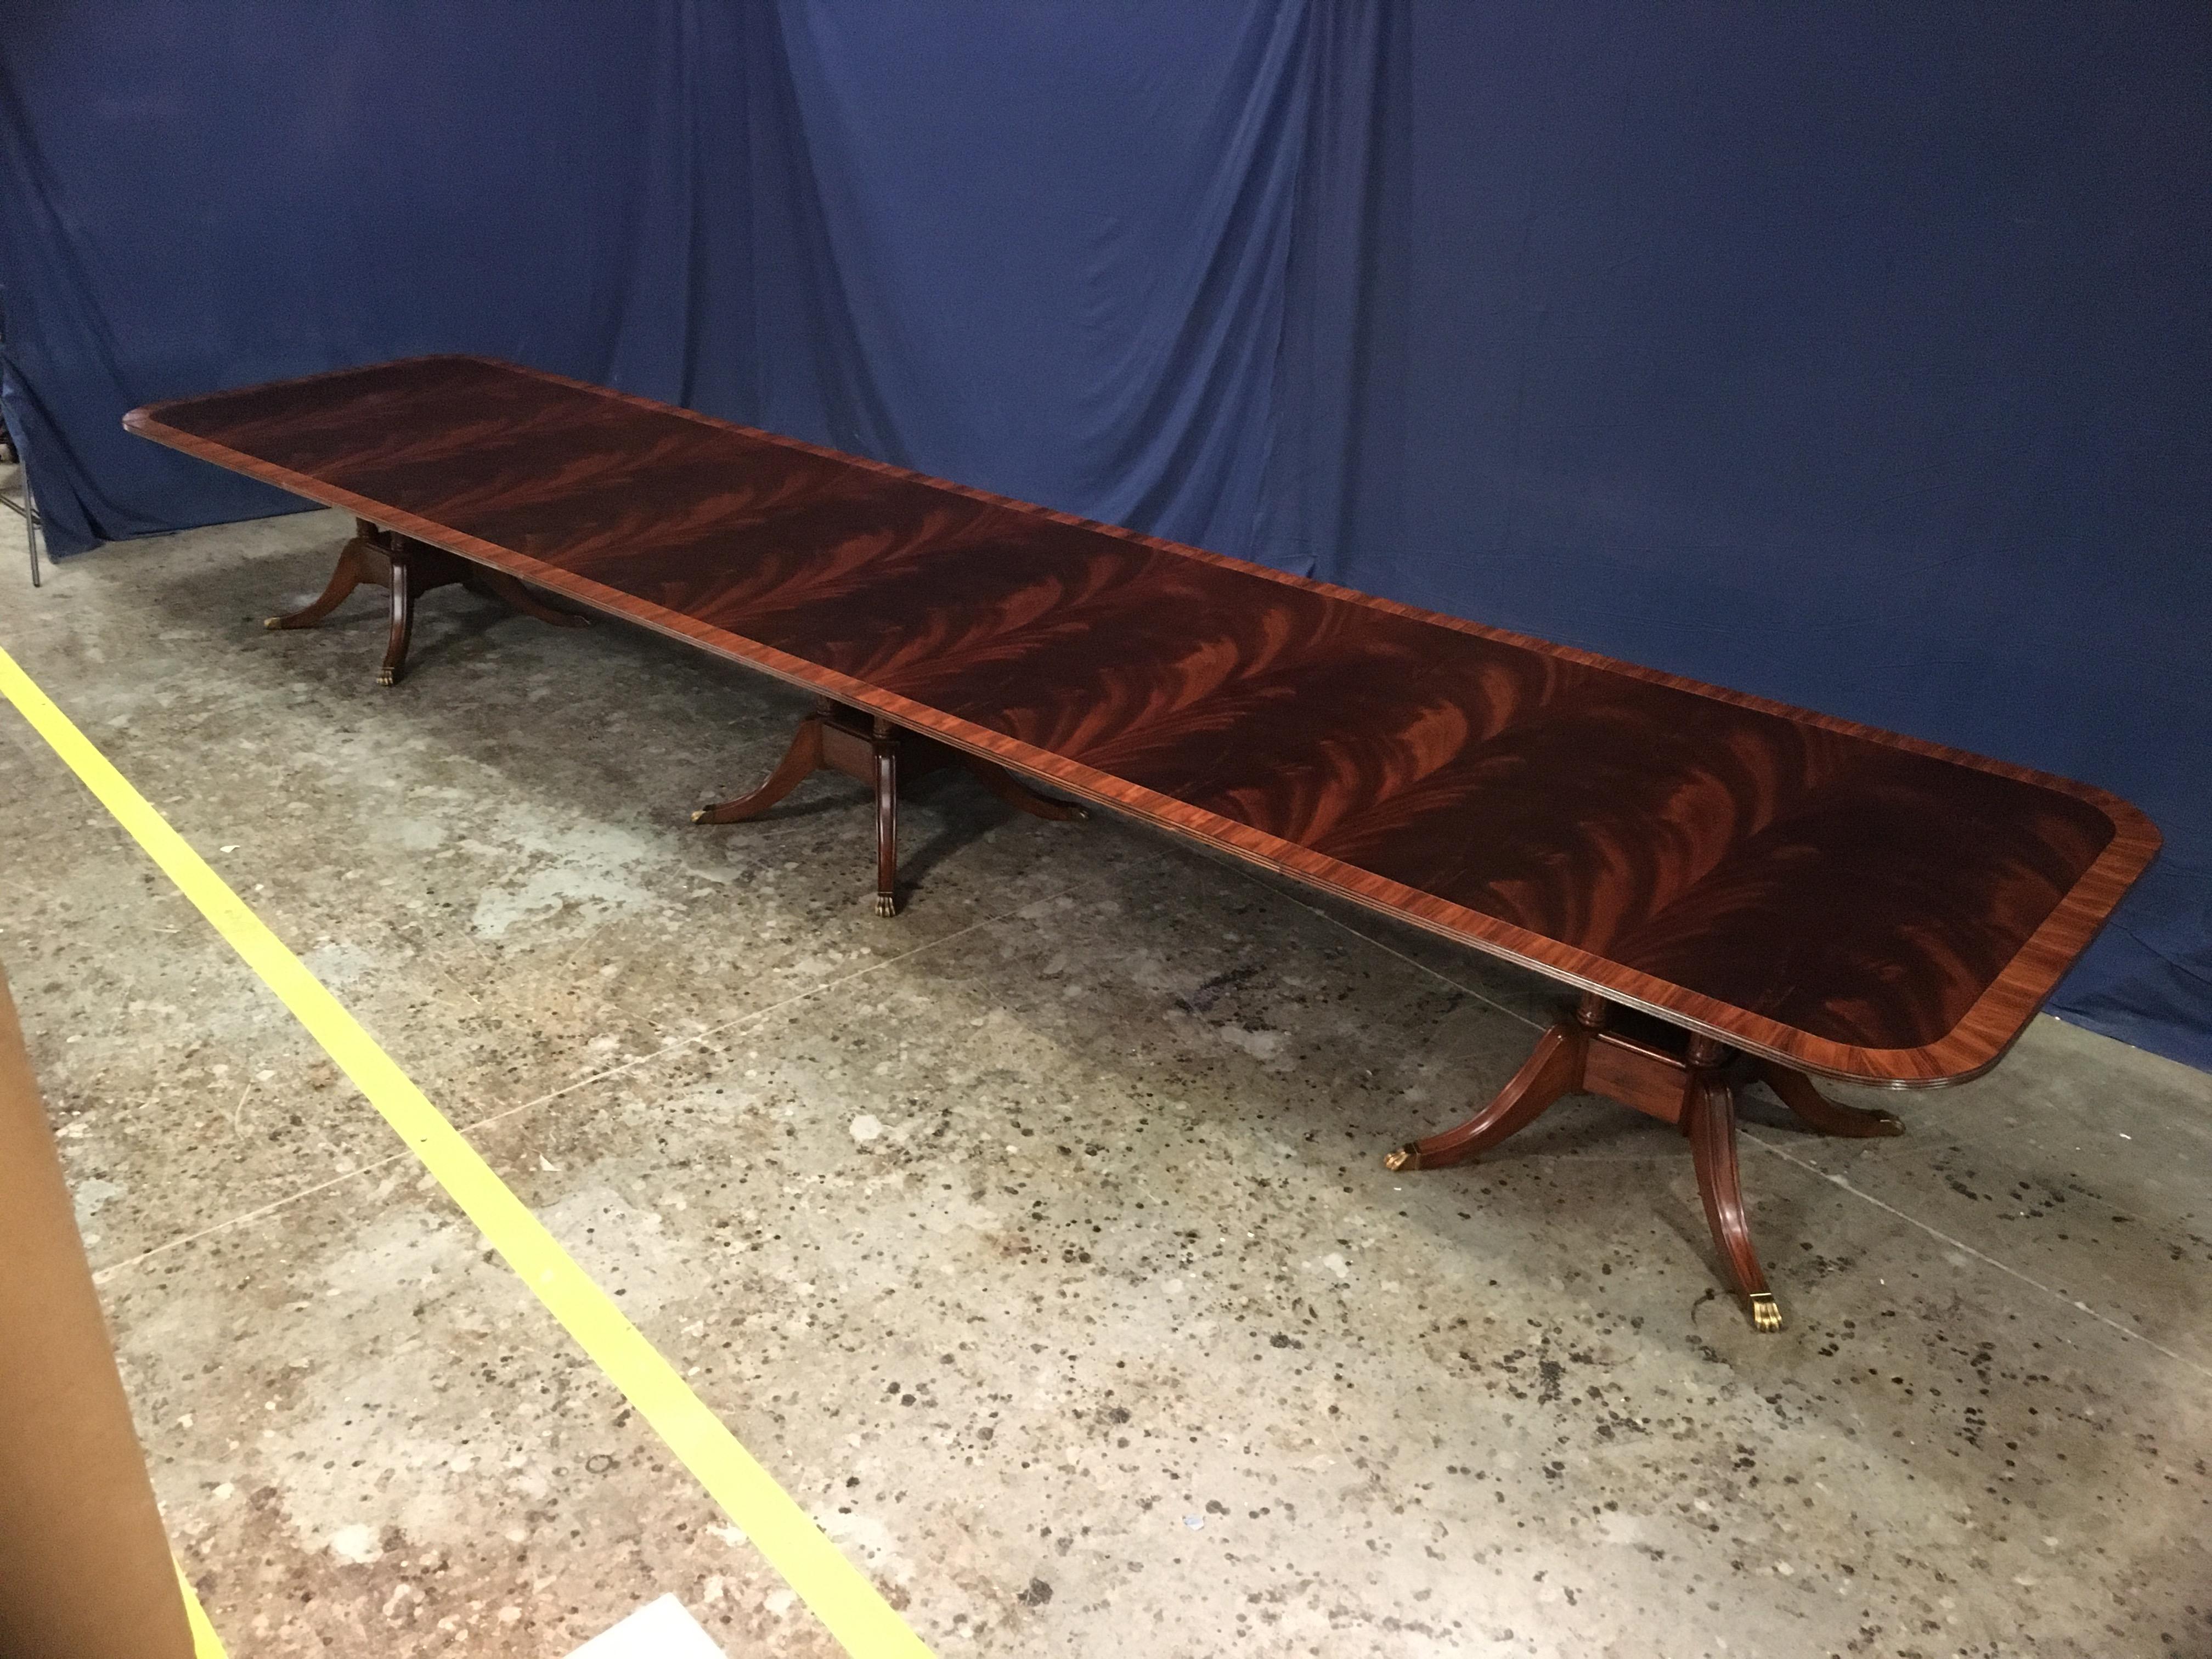 This is a made-to-order large traditional mahogany banquet/dining table made in the Leighton Hall shop. It features a field of slip-matched swirly crotch mahogany from West Africa and a Santos Rosewood border. It has a hand rubbed and polished